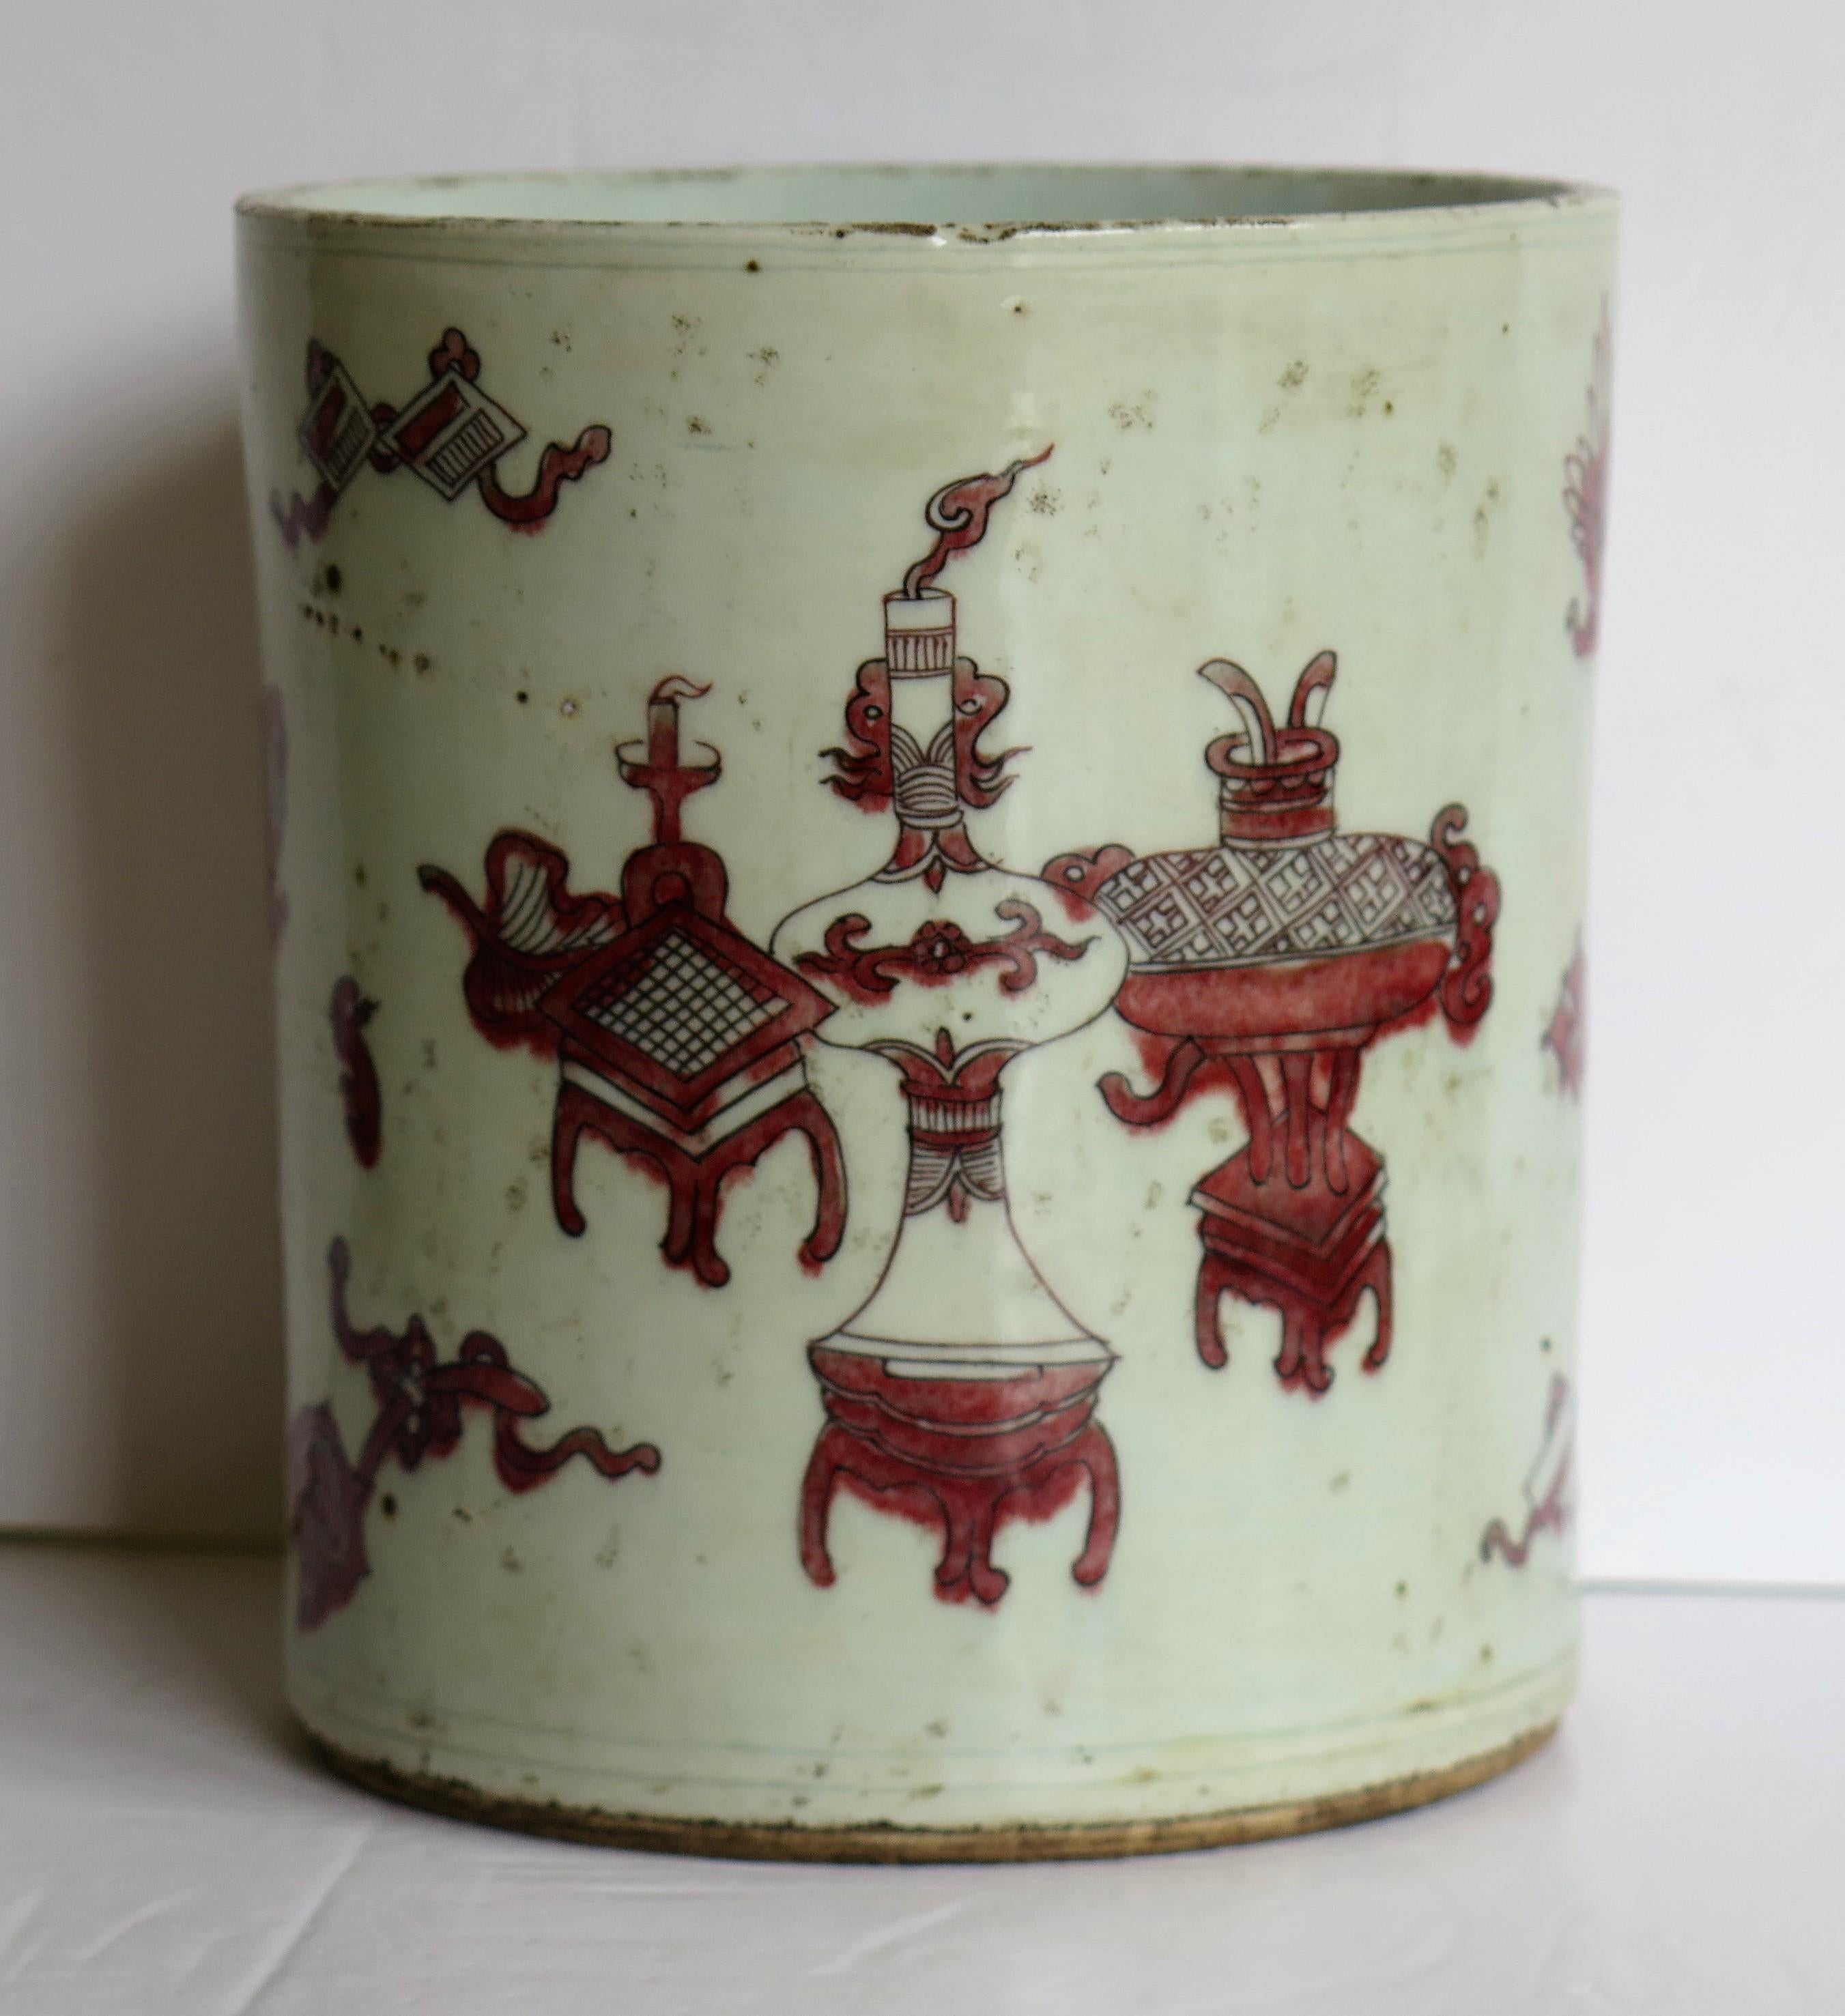 Hand-Painted Chinese Porcelain Brush Pot Hand Painted in Under-Glaze Red, 18th Century Qing